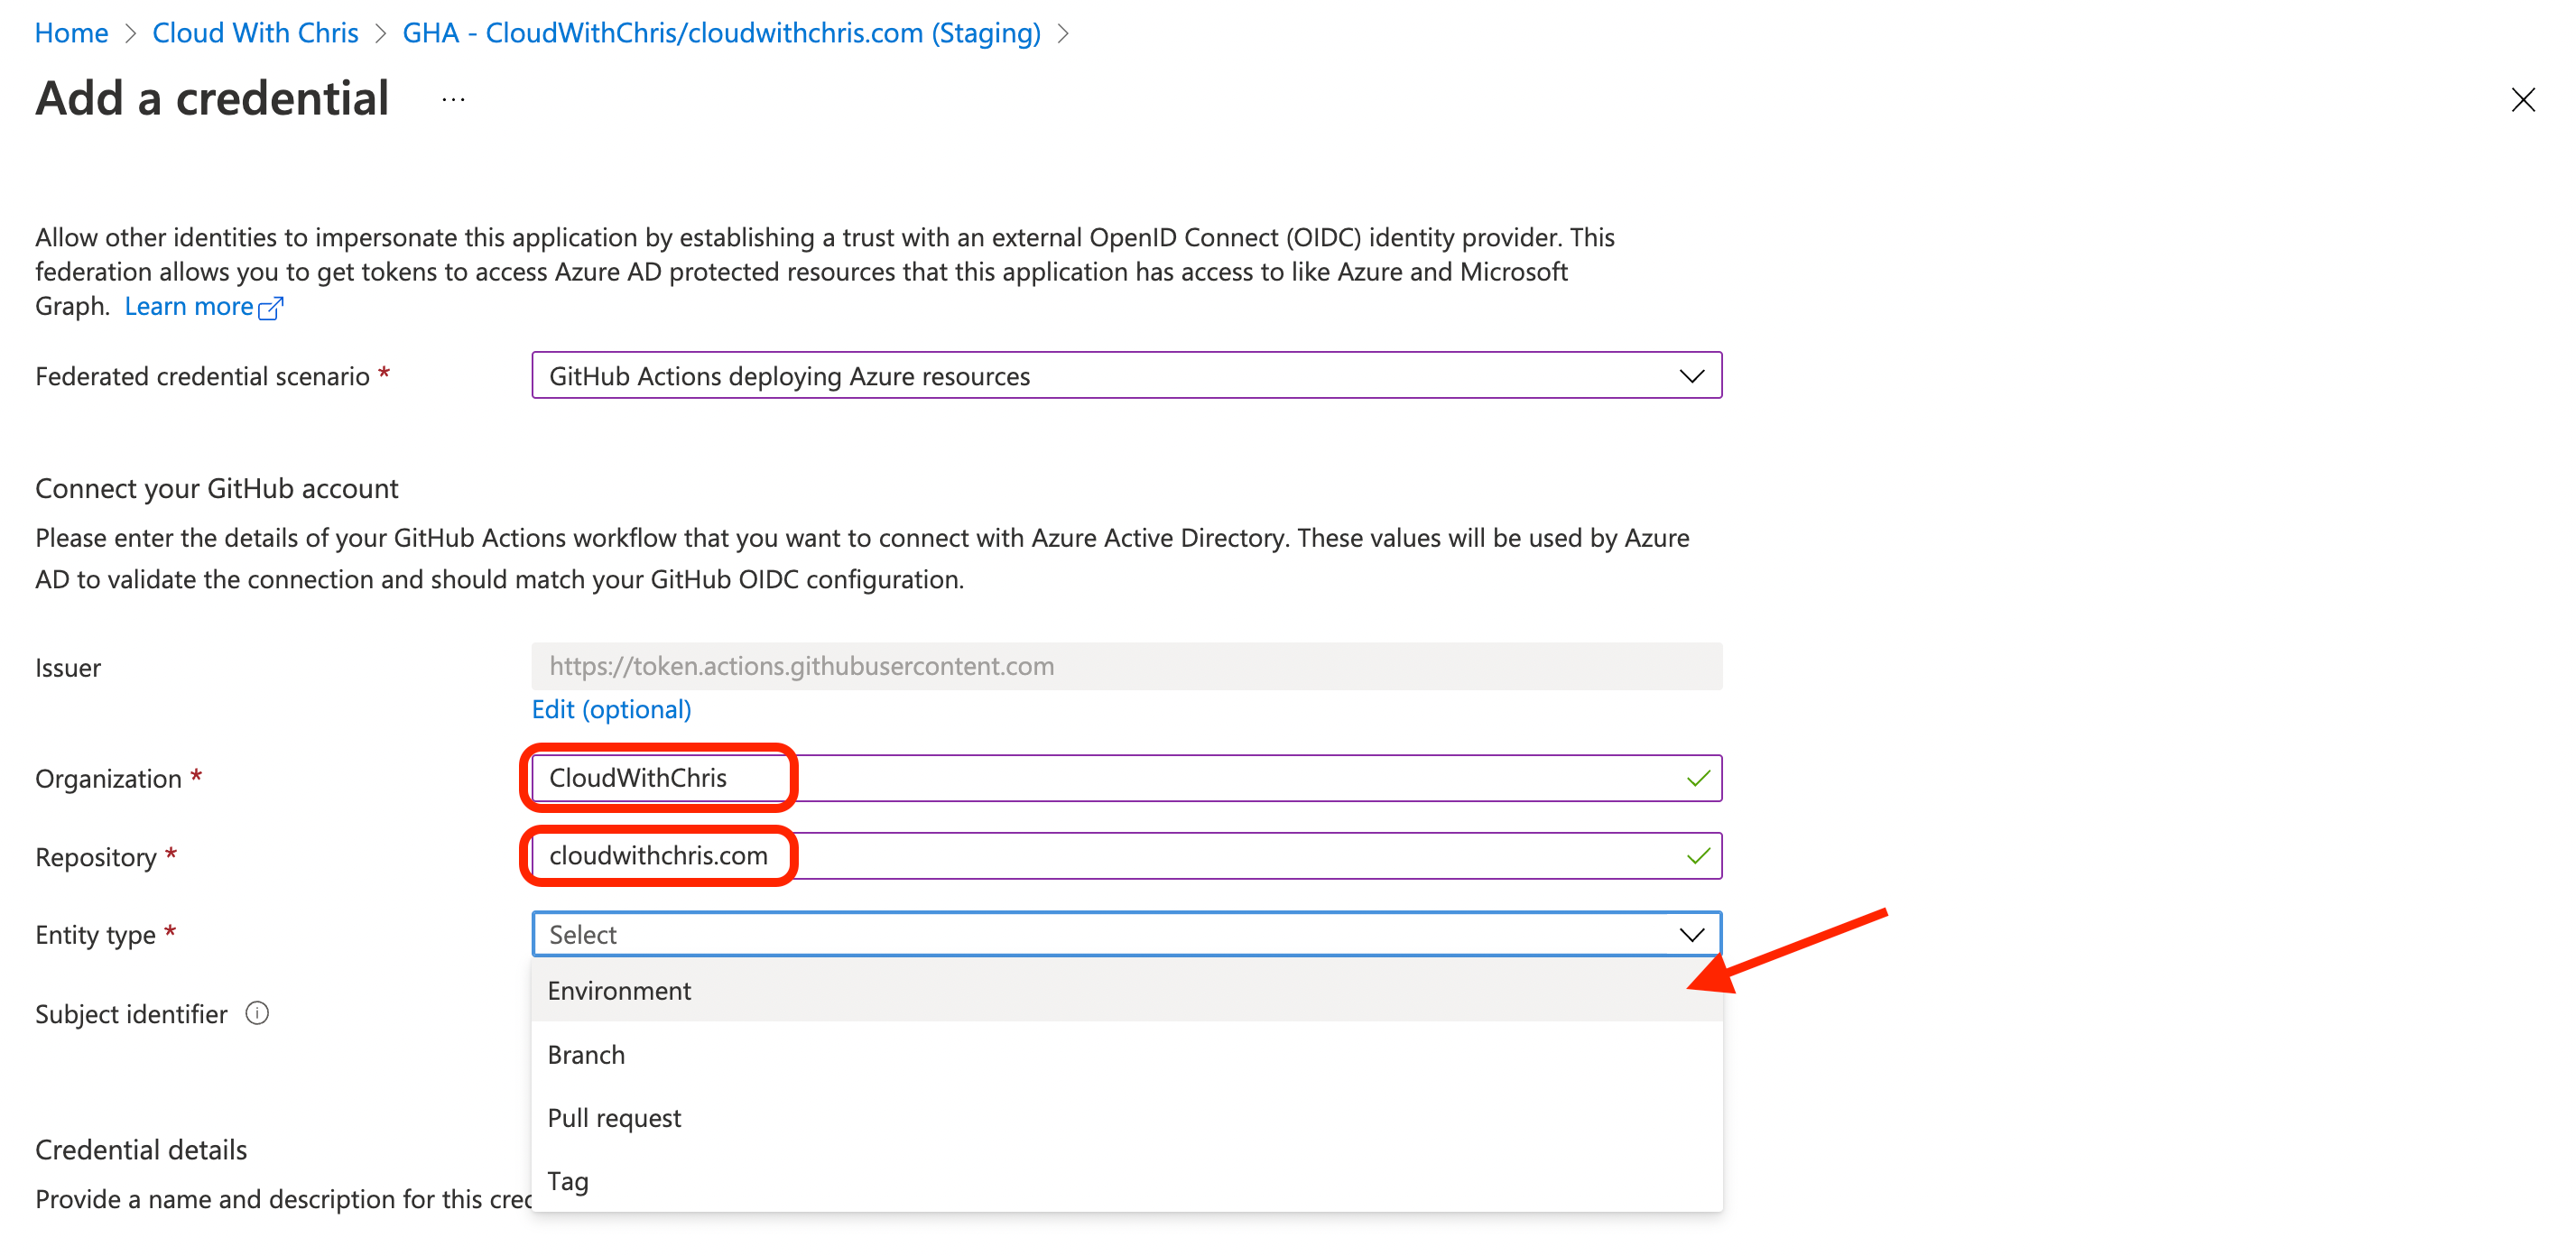 Screenshot showing the Federated credential scenario chosen is GitHub Actions deploying to Azure resources. This results in the Organization, Repository and Entity Type options being displayed, with values configured as described in the text above.